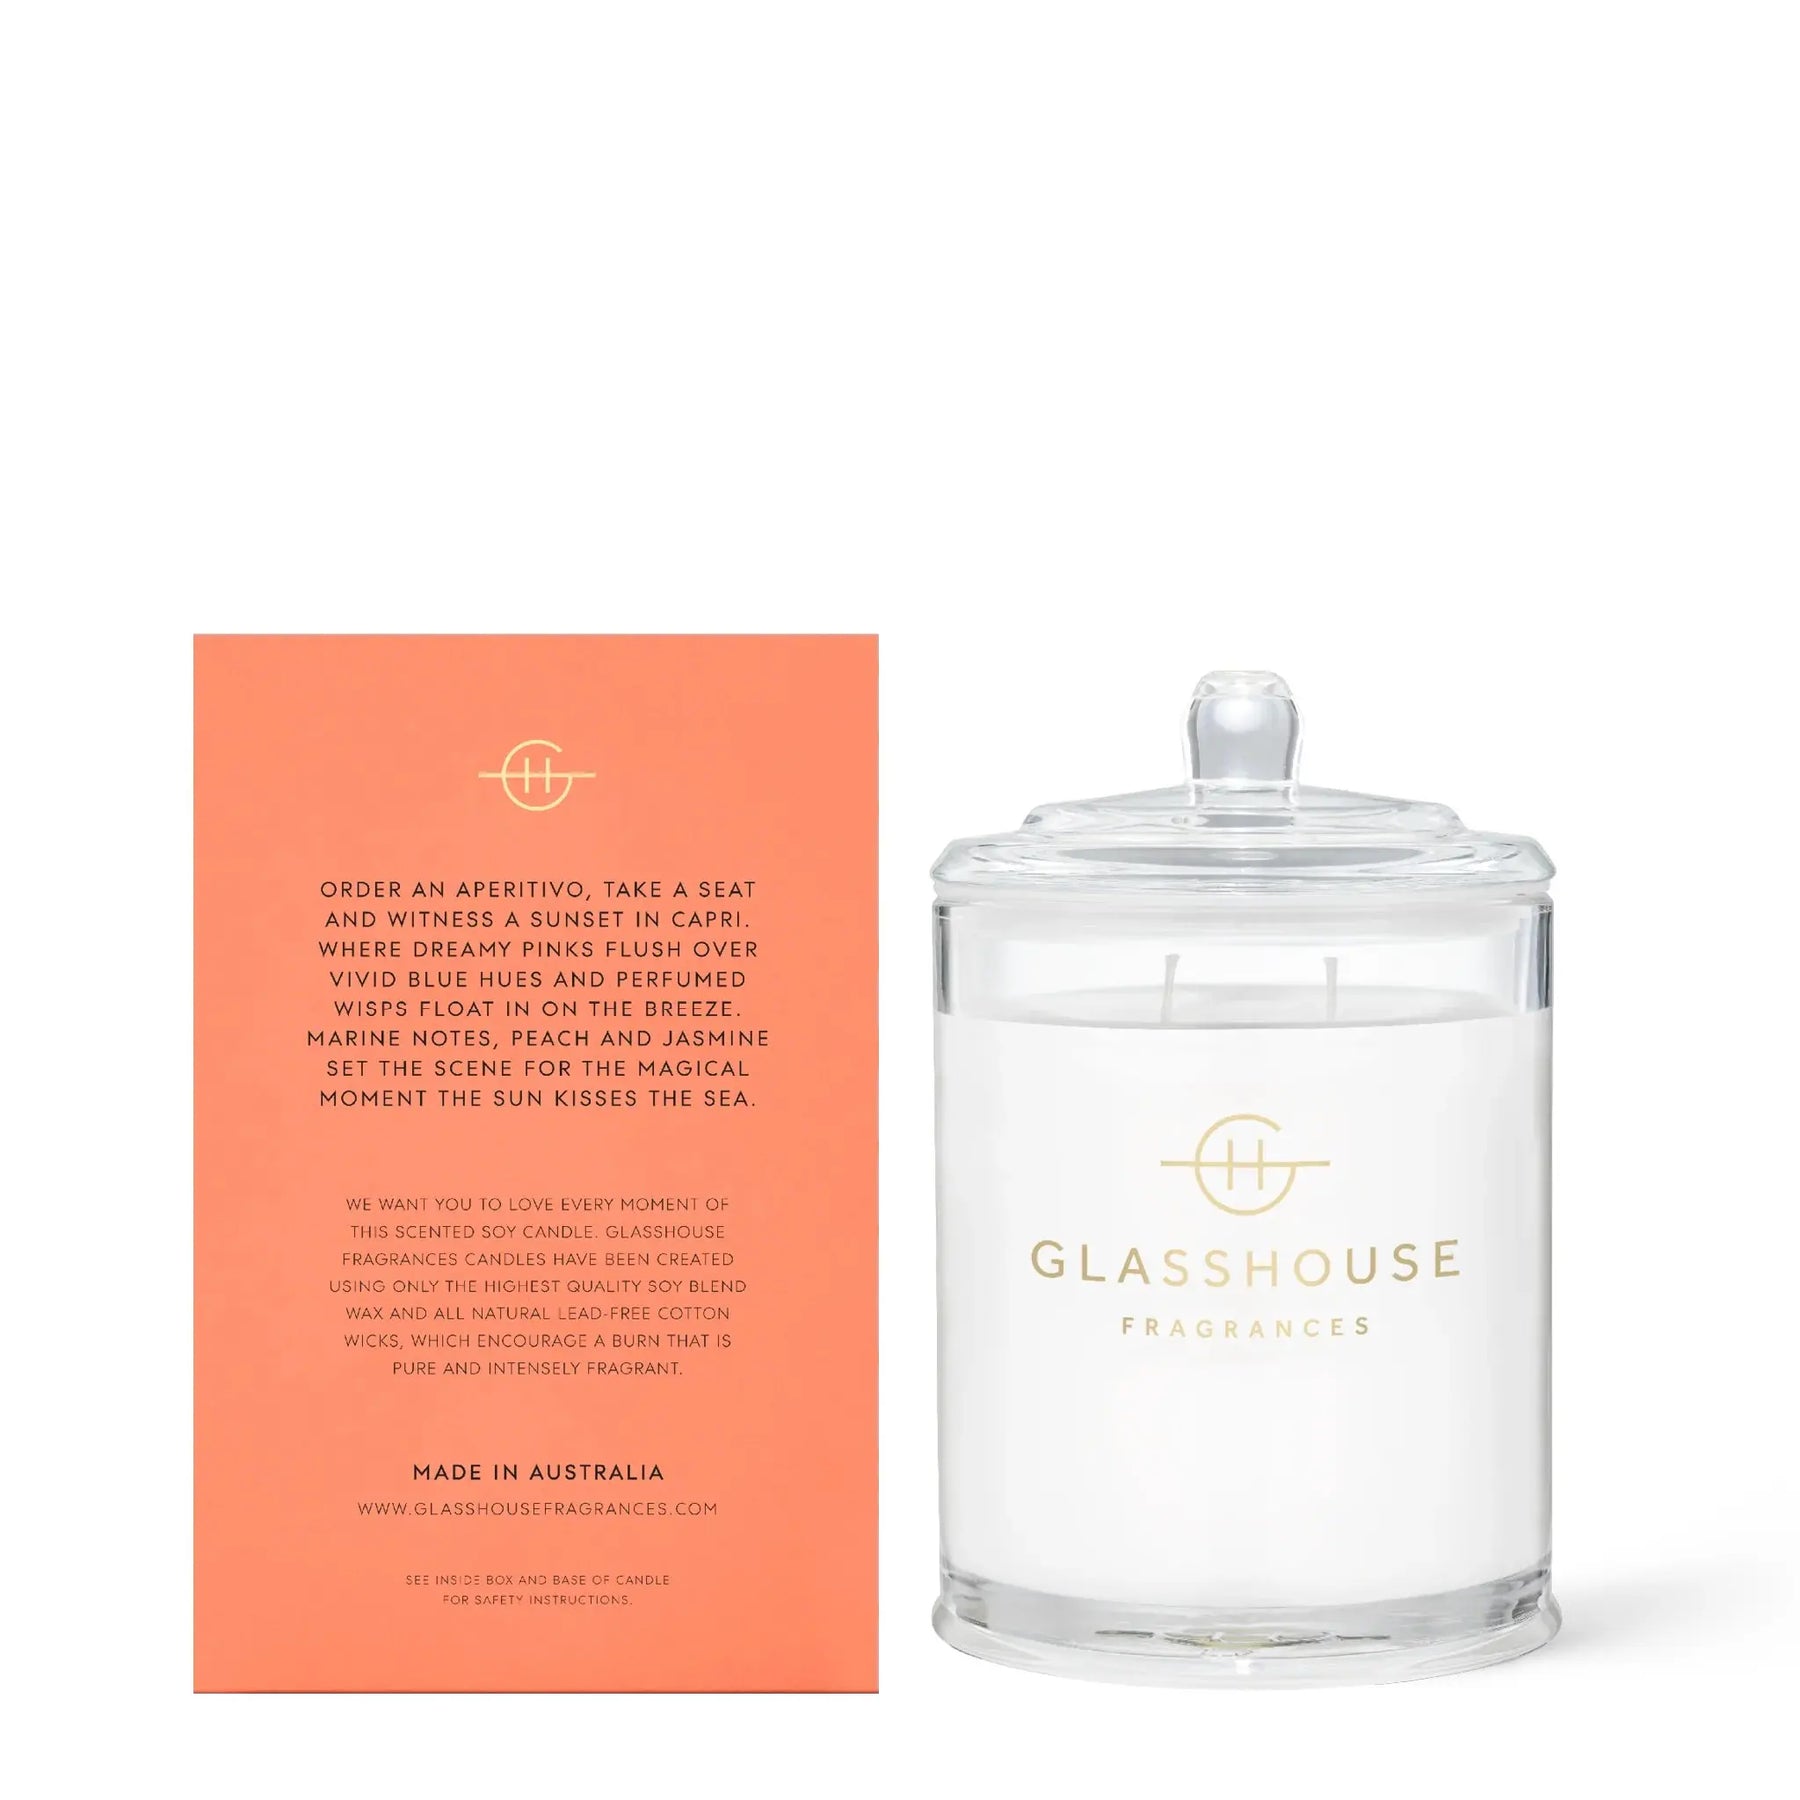 Glasshouse Fragrances Sunsets in Capri Soy Candle White Peach and Sea Breeze back of box reading, order an aperitivo, take a seat and withness a sunset in capri. Where dreamy pinks flush over vivid blue hues and perfumed wisps float in on the breeze. Marine Notes, peach and jasmine set the scene for the magical moment the sun kisses the sea. We want you to love every moment of this scented soy candle. Glasshouse fragrances candles have been created using only the highest quality soy blend wax and all natura